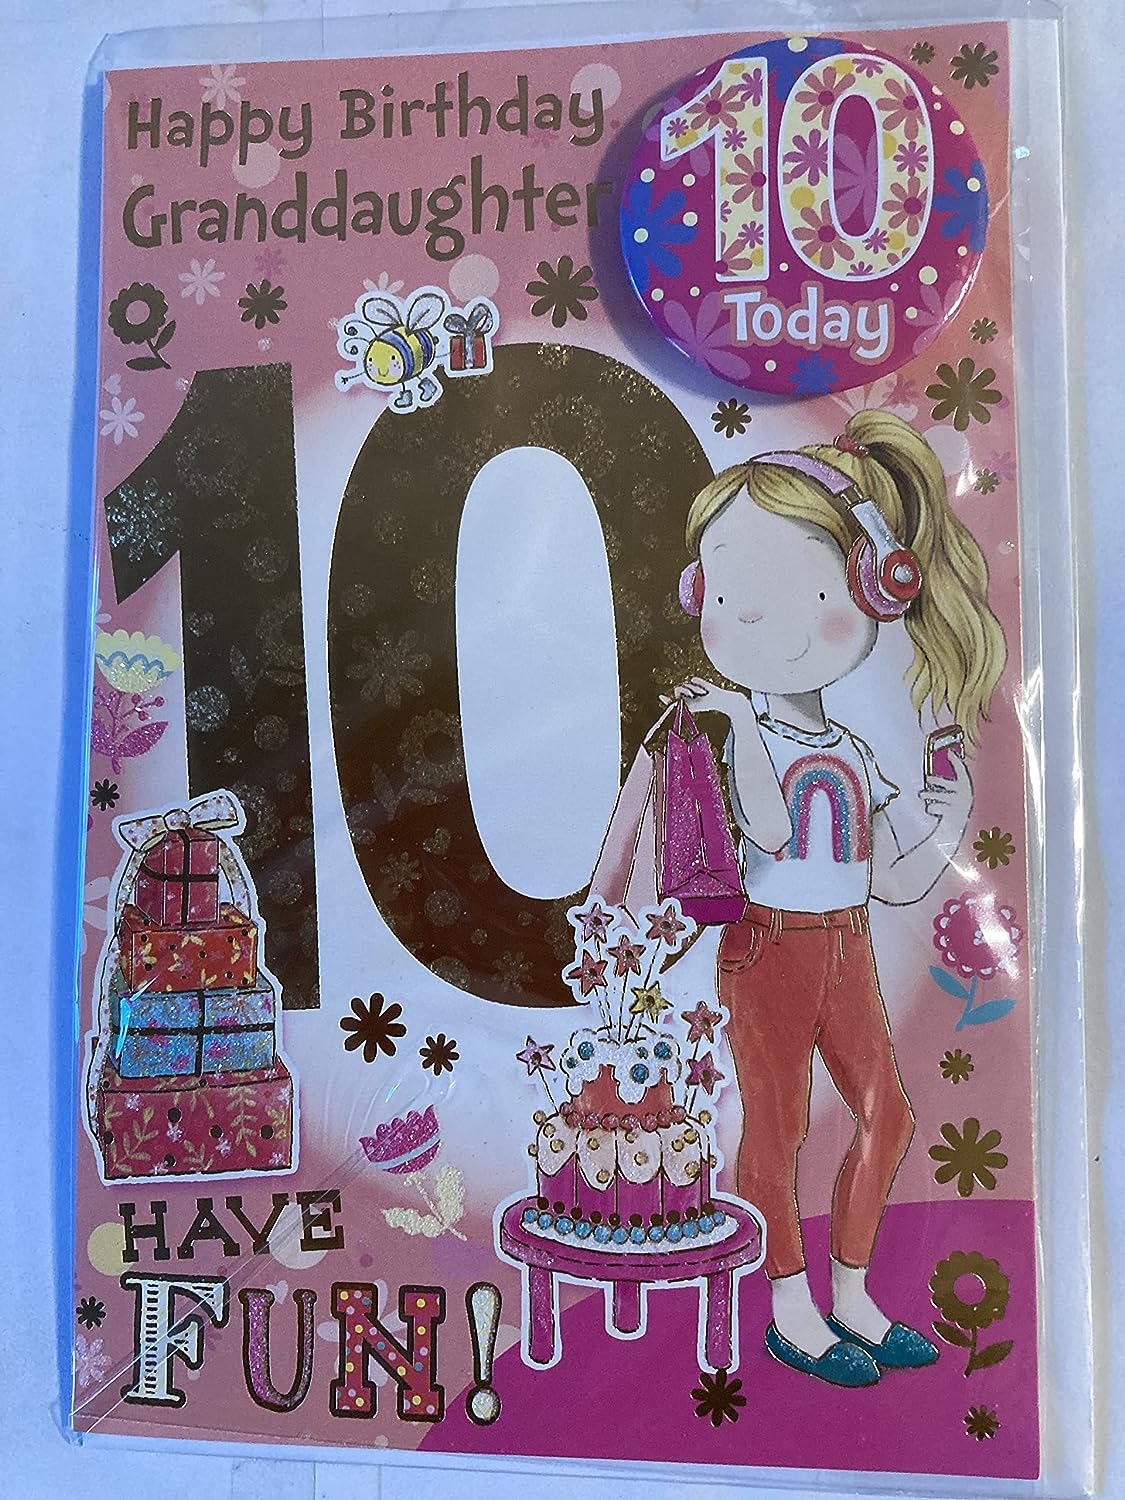 Xpress Yourself Happy Birthday Granddaughter 10 Today! Birthday Card RRP £3.99 CLEARANCE XL £2.99